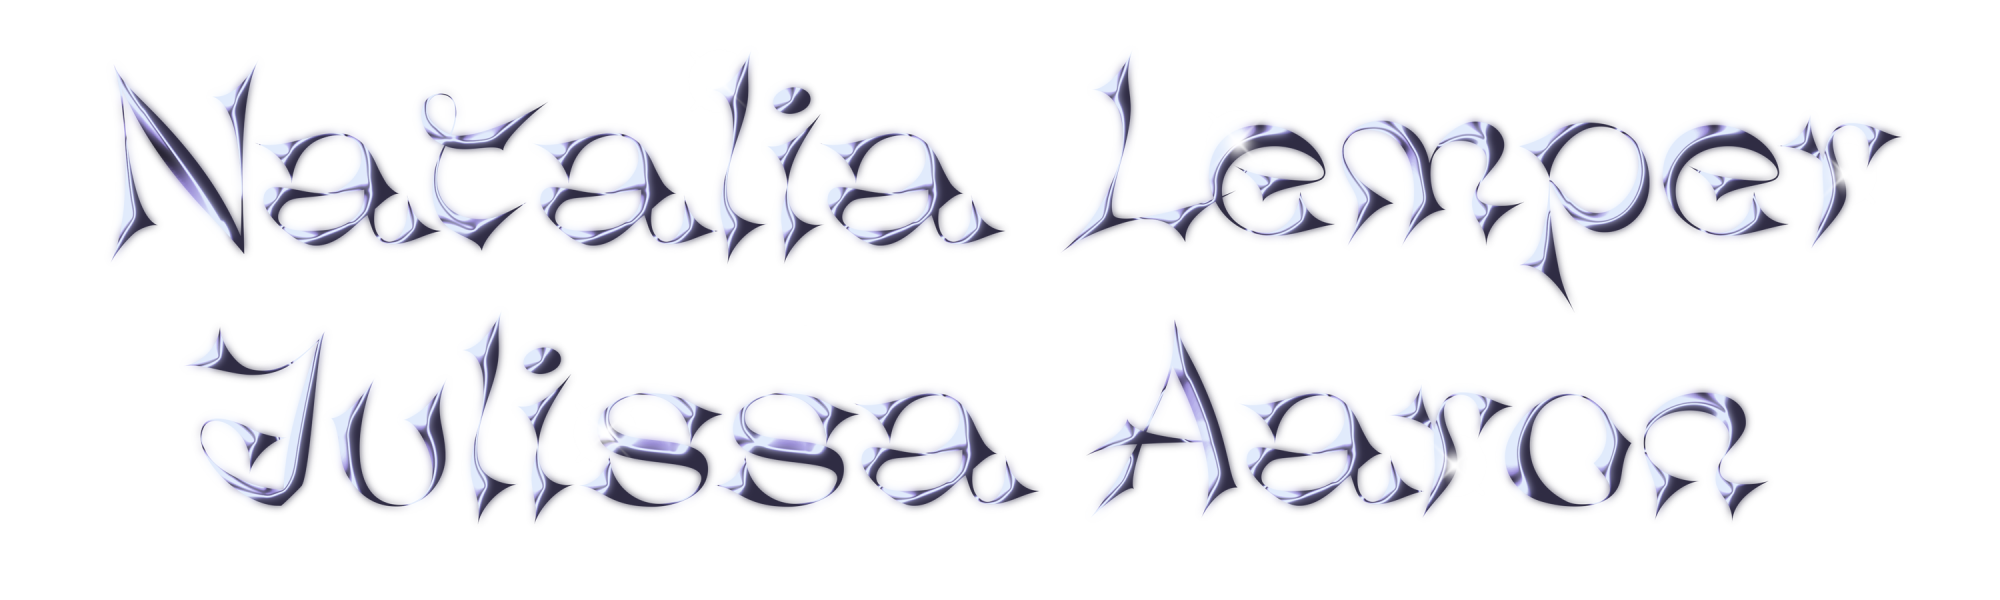 stylized stacked type that reads “Natalia Lemper“ and “Julissa Aaron”